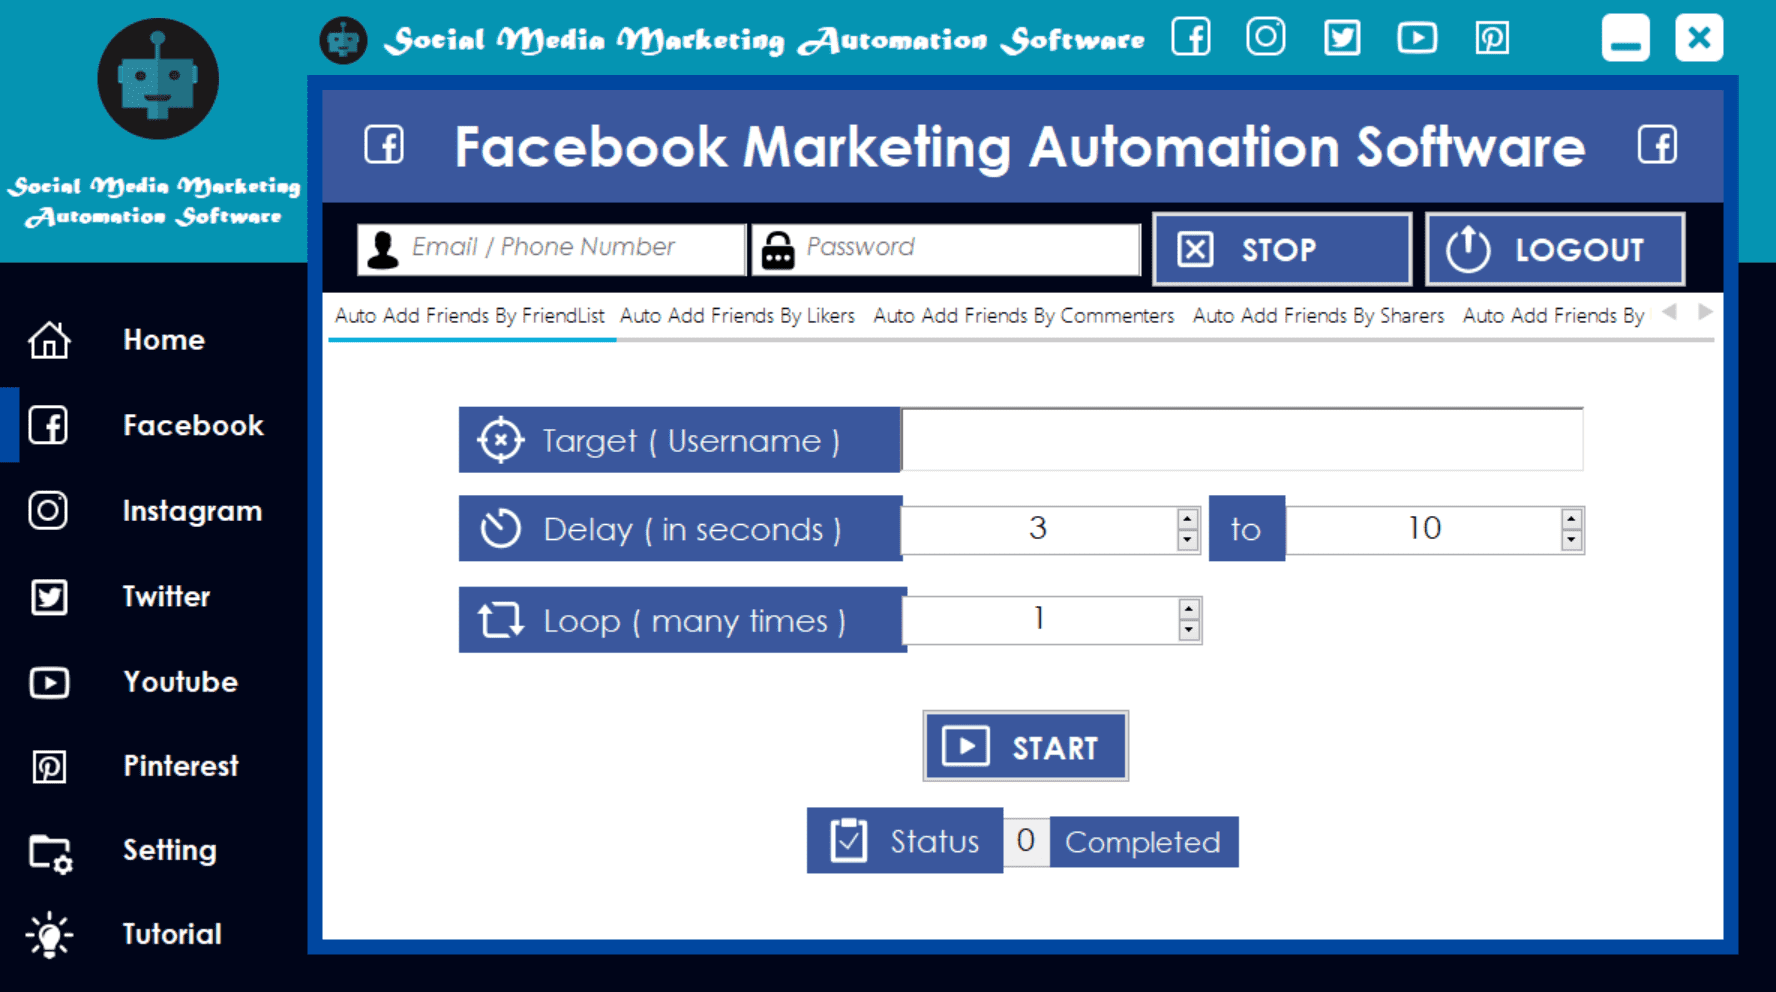 Facebook Marketing Automation Software